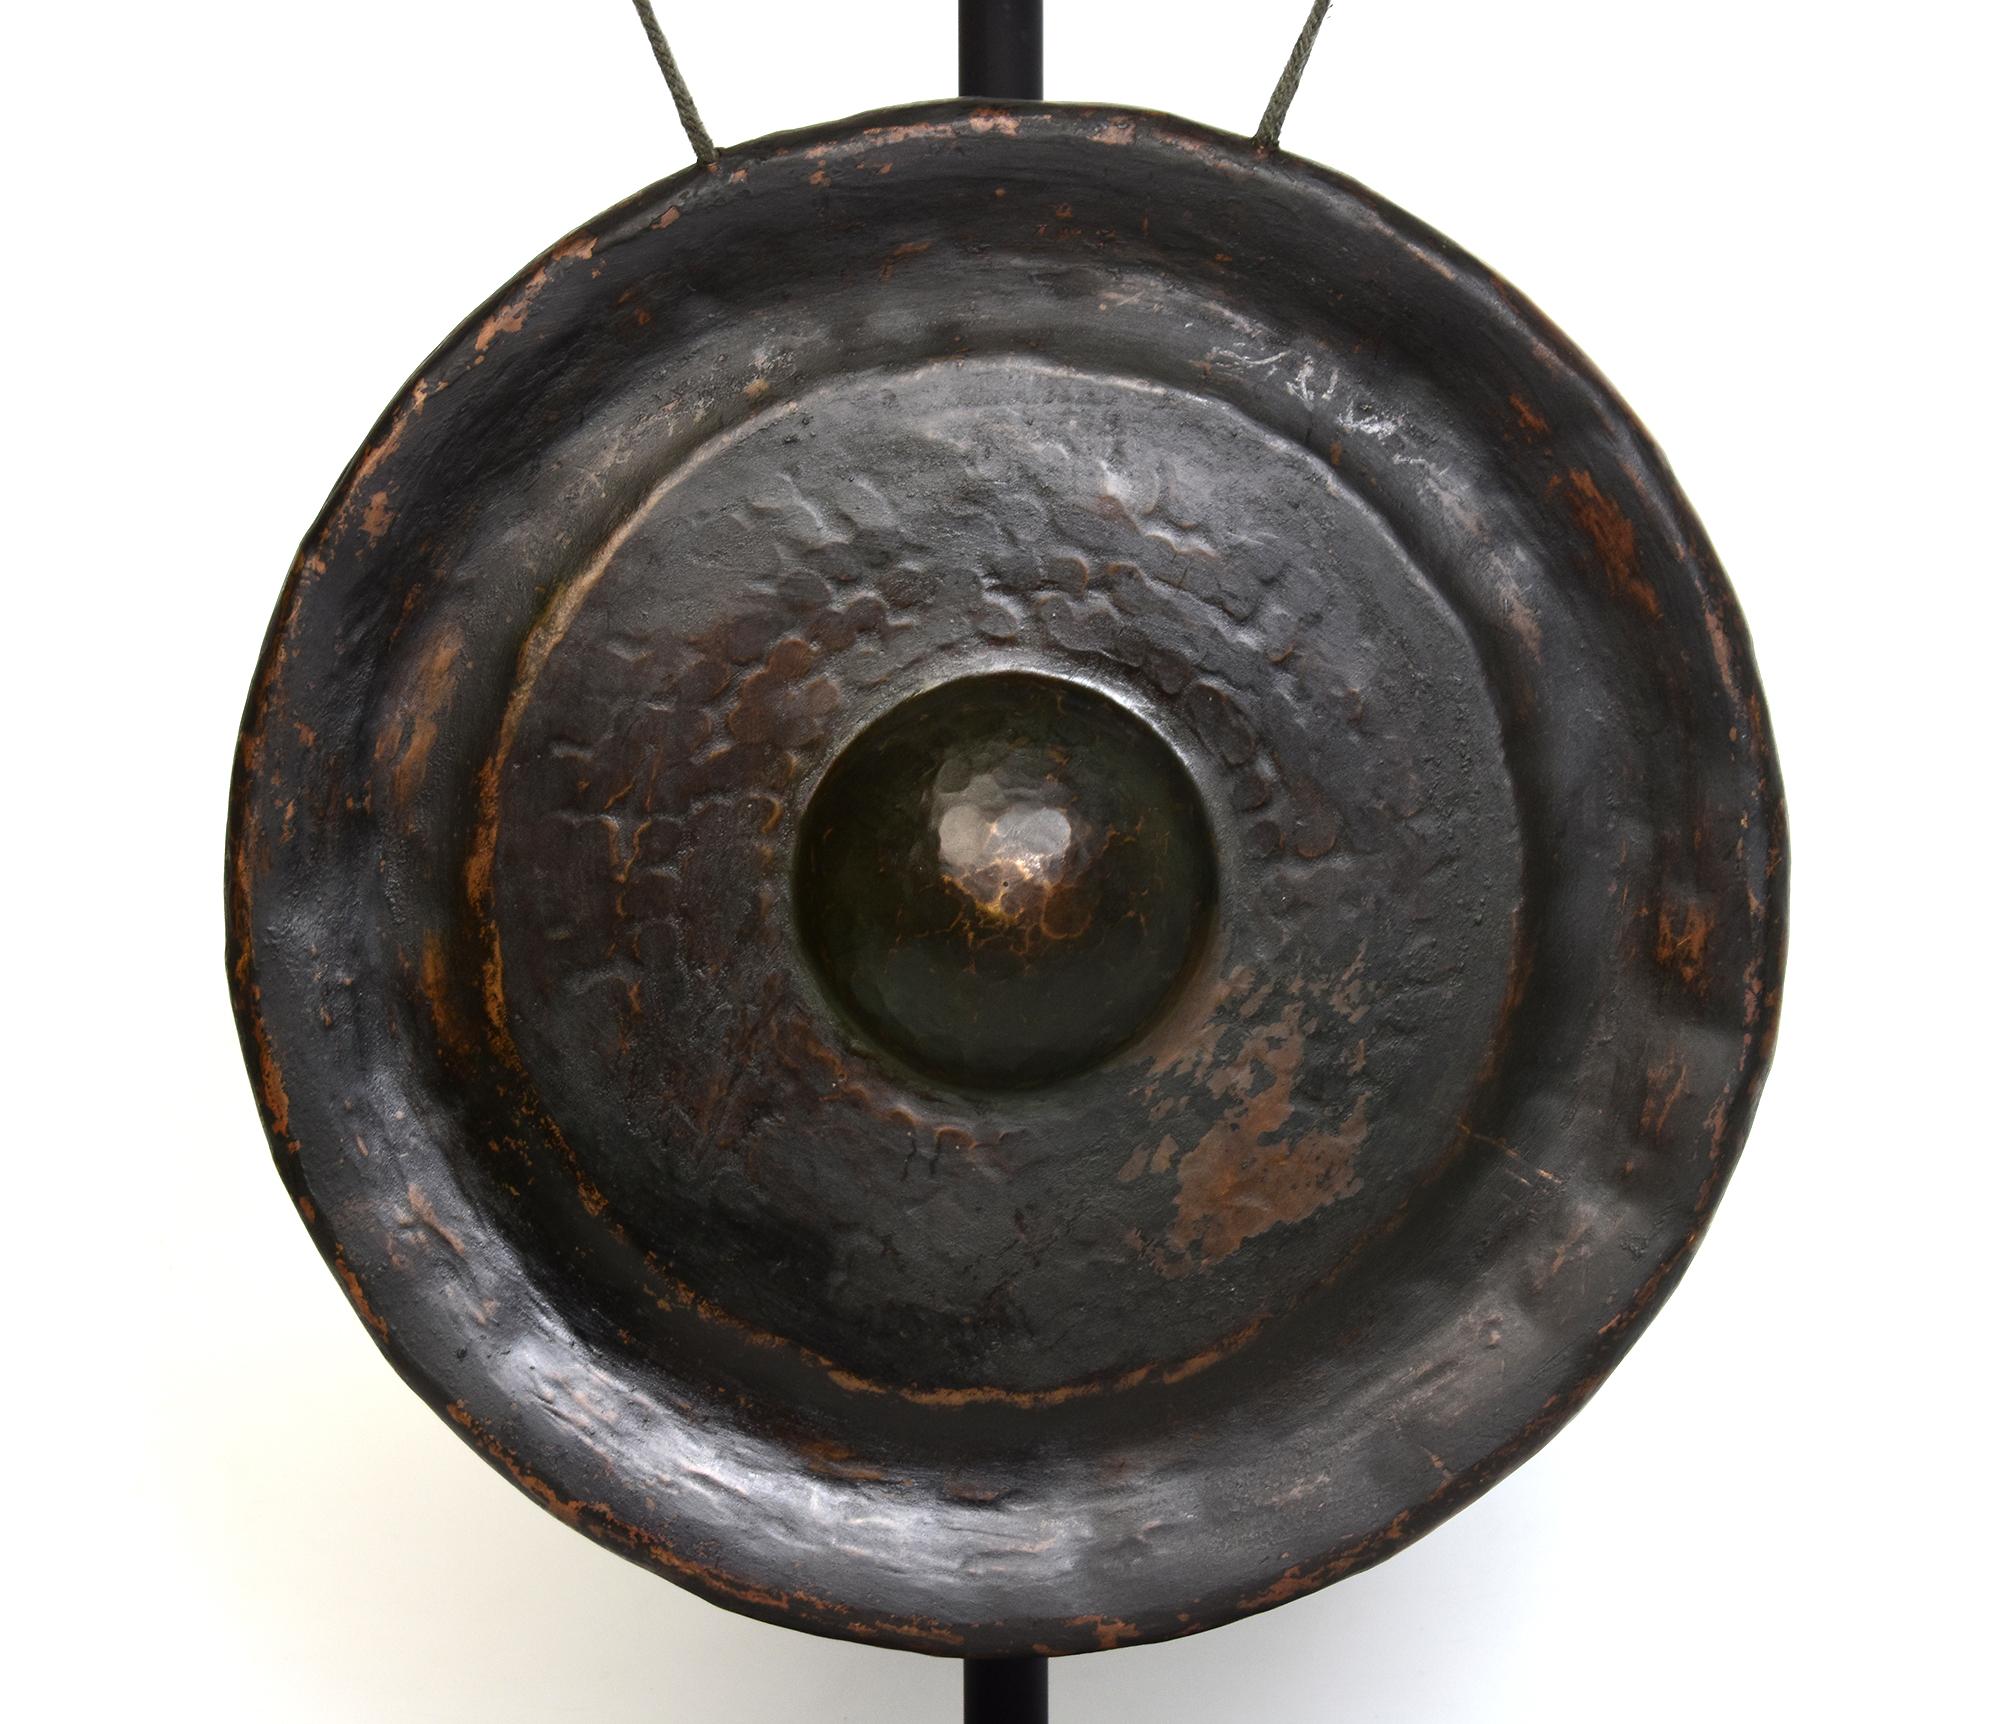 Antique Laos bronze gong, a kind of Laos musical instrument which produces a loud and sonorous sound. Gong stick is included.

Age: Laos, 19th Century
Size of gong only: Diameter 35.5 C.M. / Thickness 9 C.M.
Height including stand: 52.7